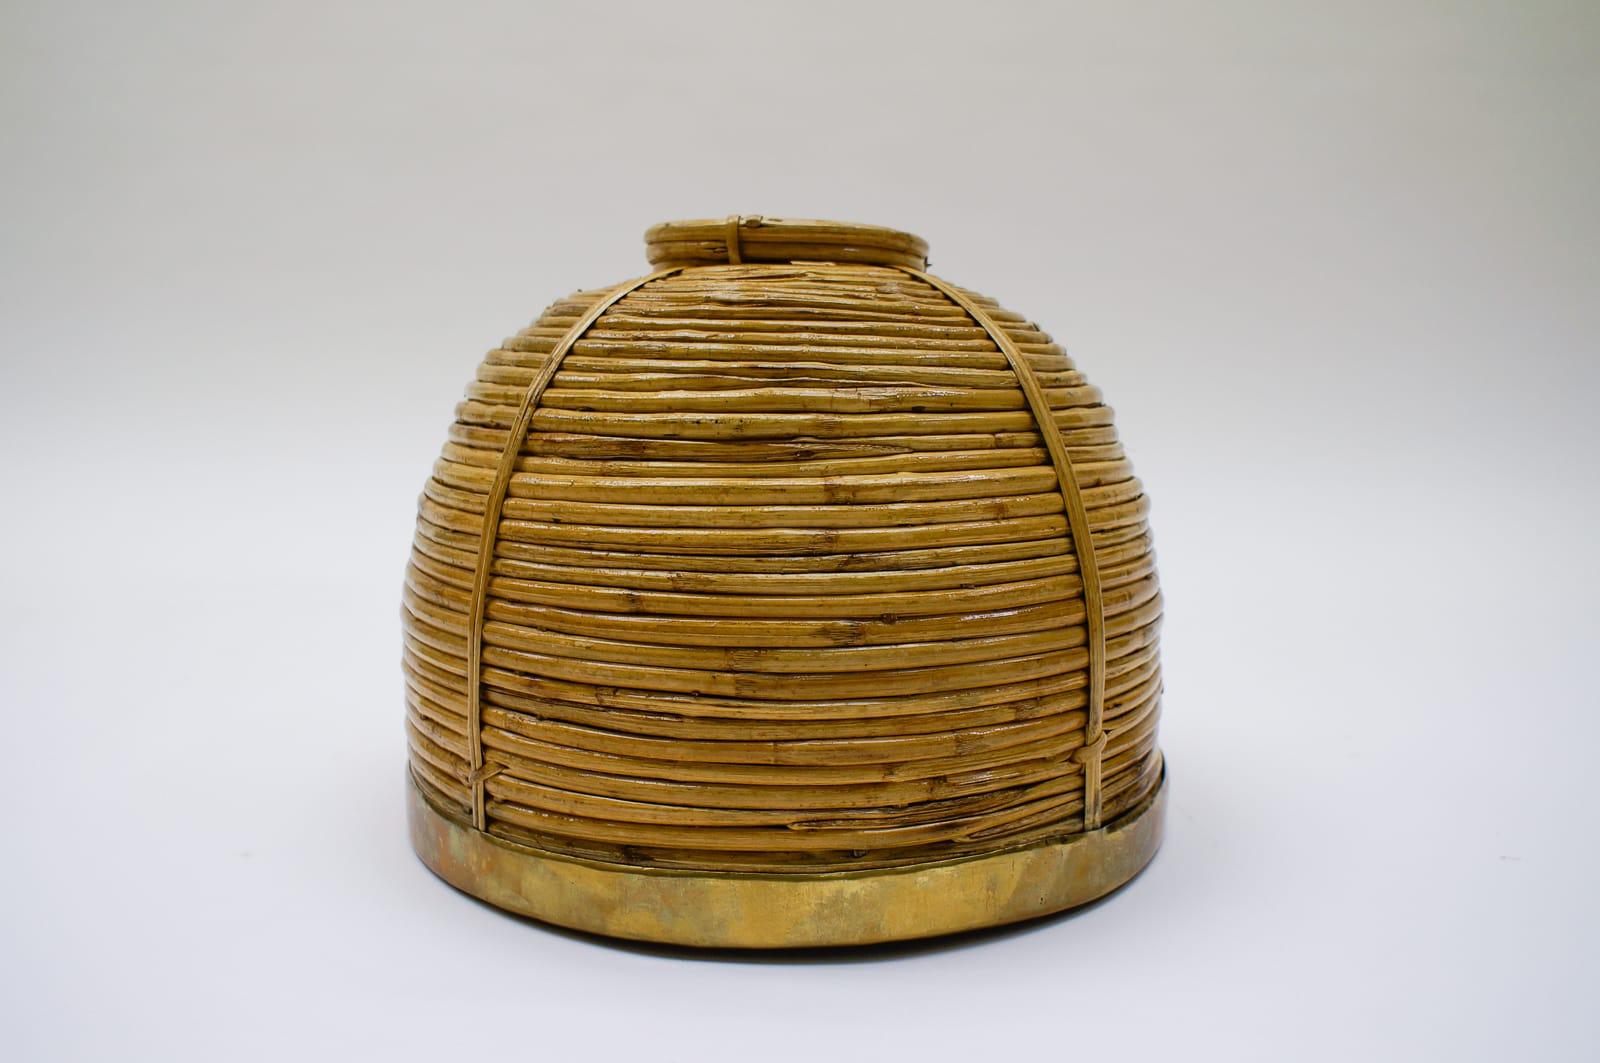 Large Rattan and Brass Midcentury Handcrafted Bowl, Austria, 1950s For Sale 5